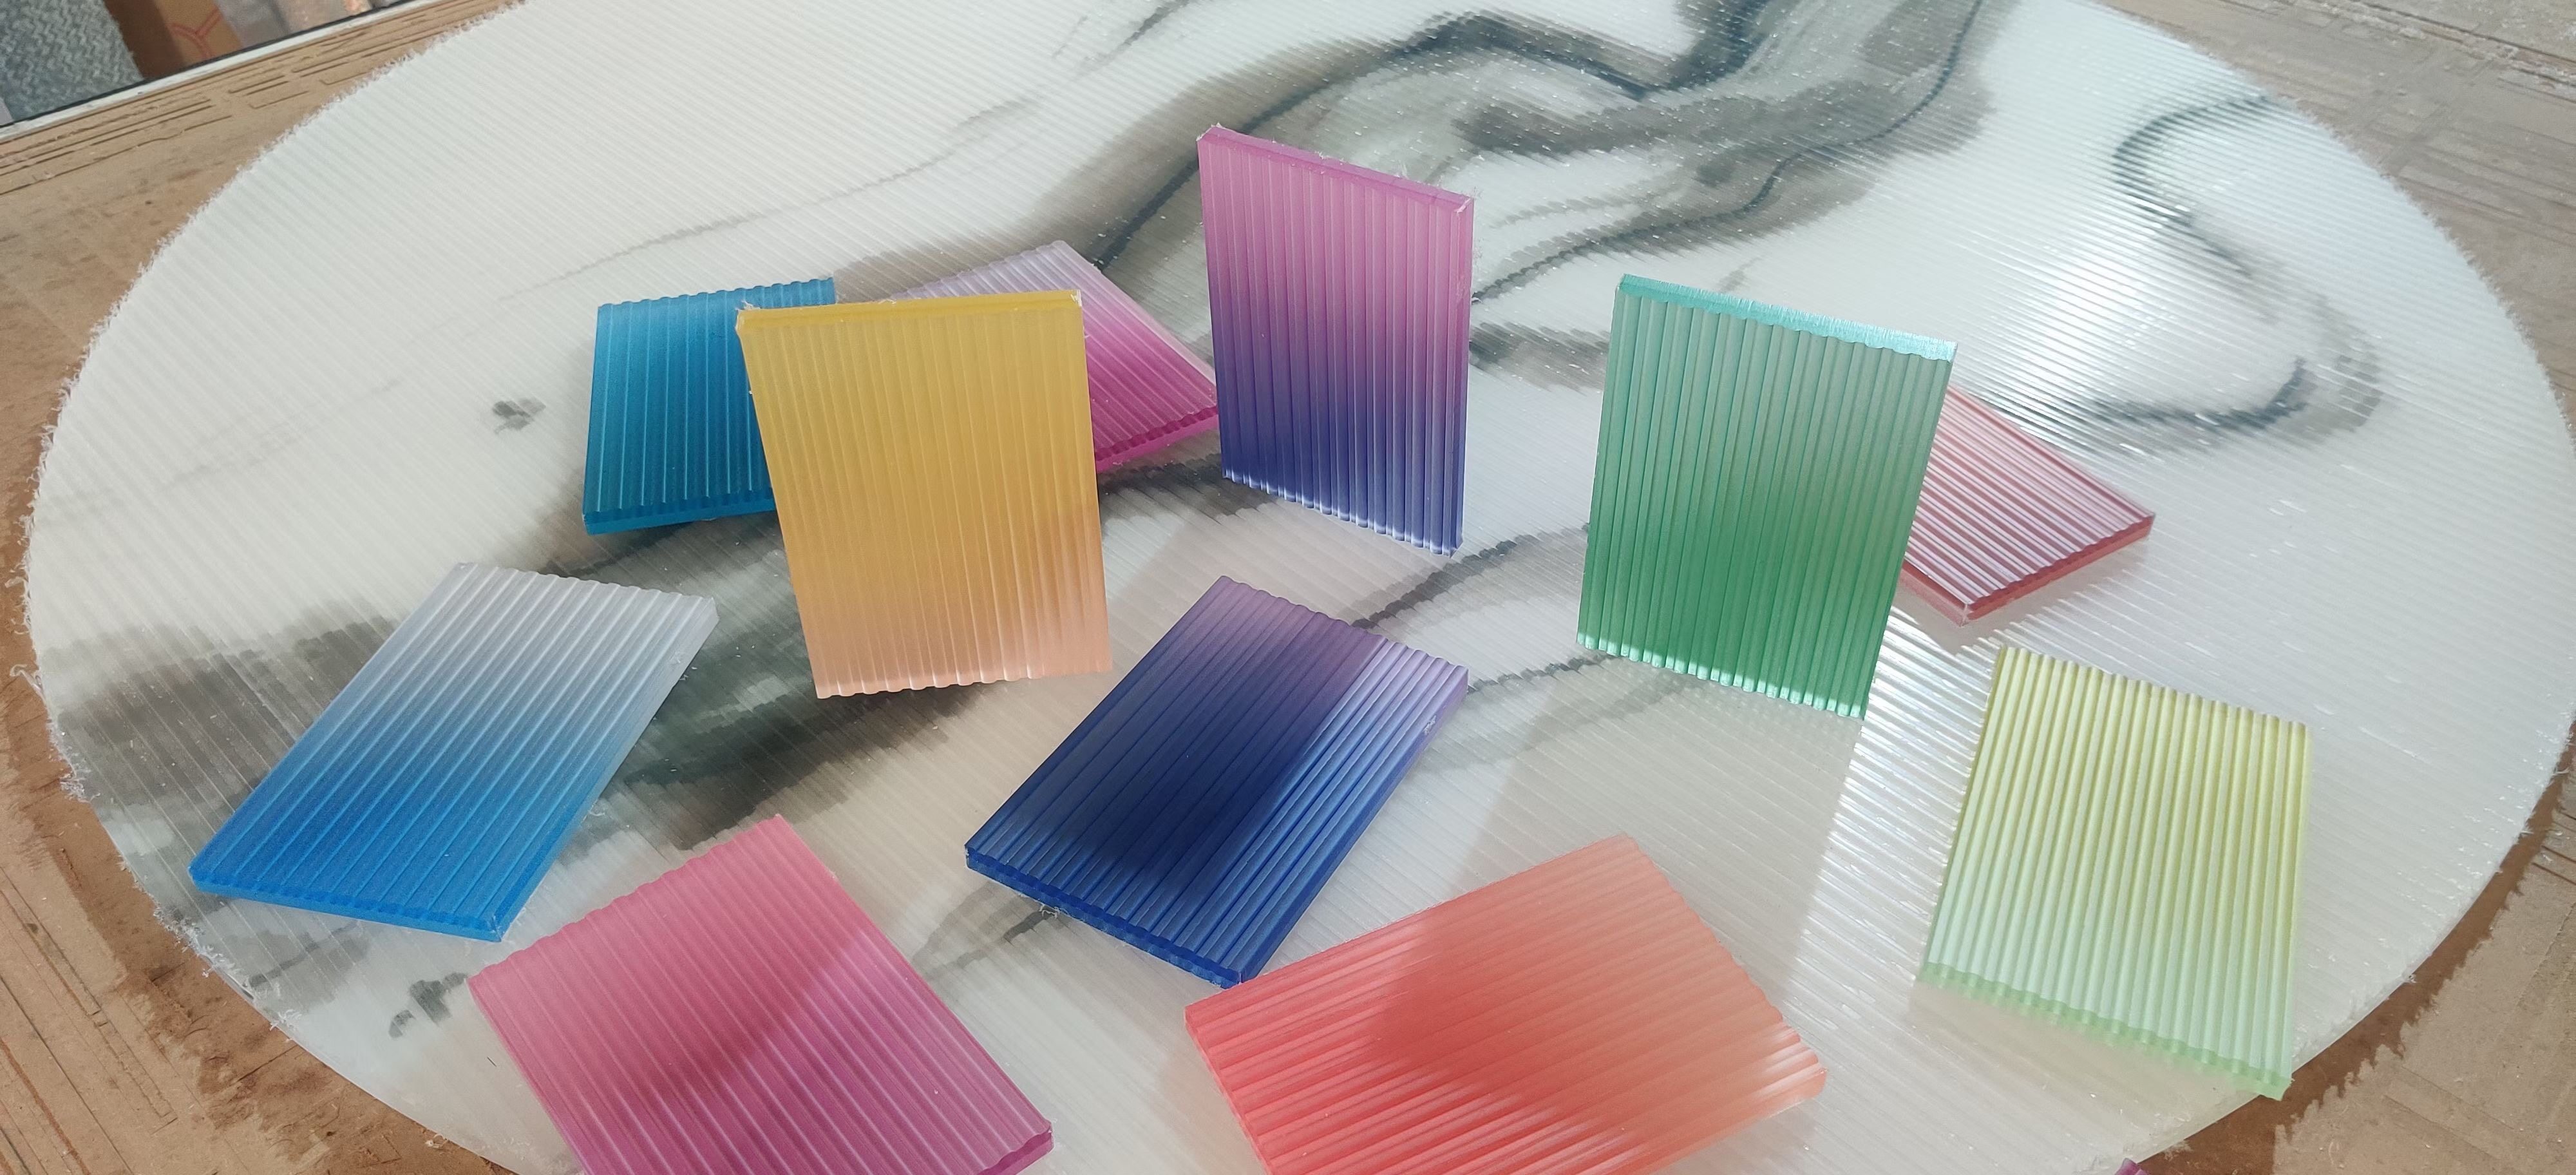 patterned acrylic sheets for laser cutting, colored acrylic sheets for laser cutting